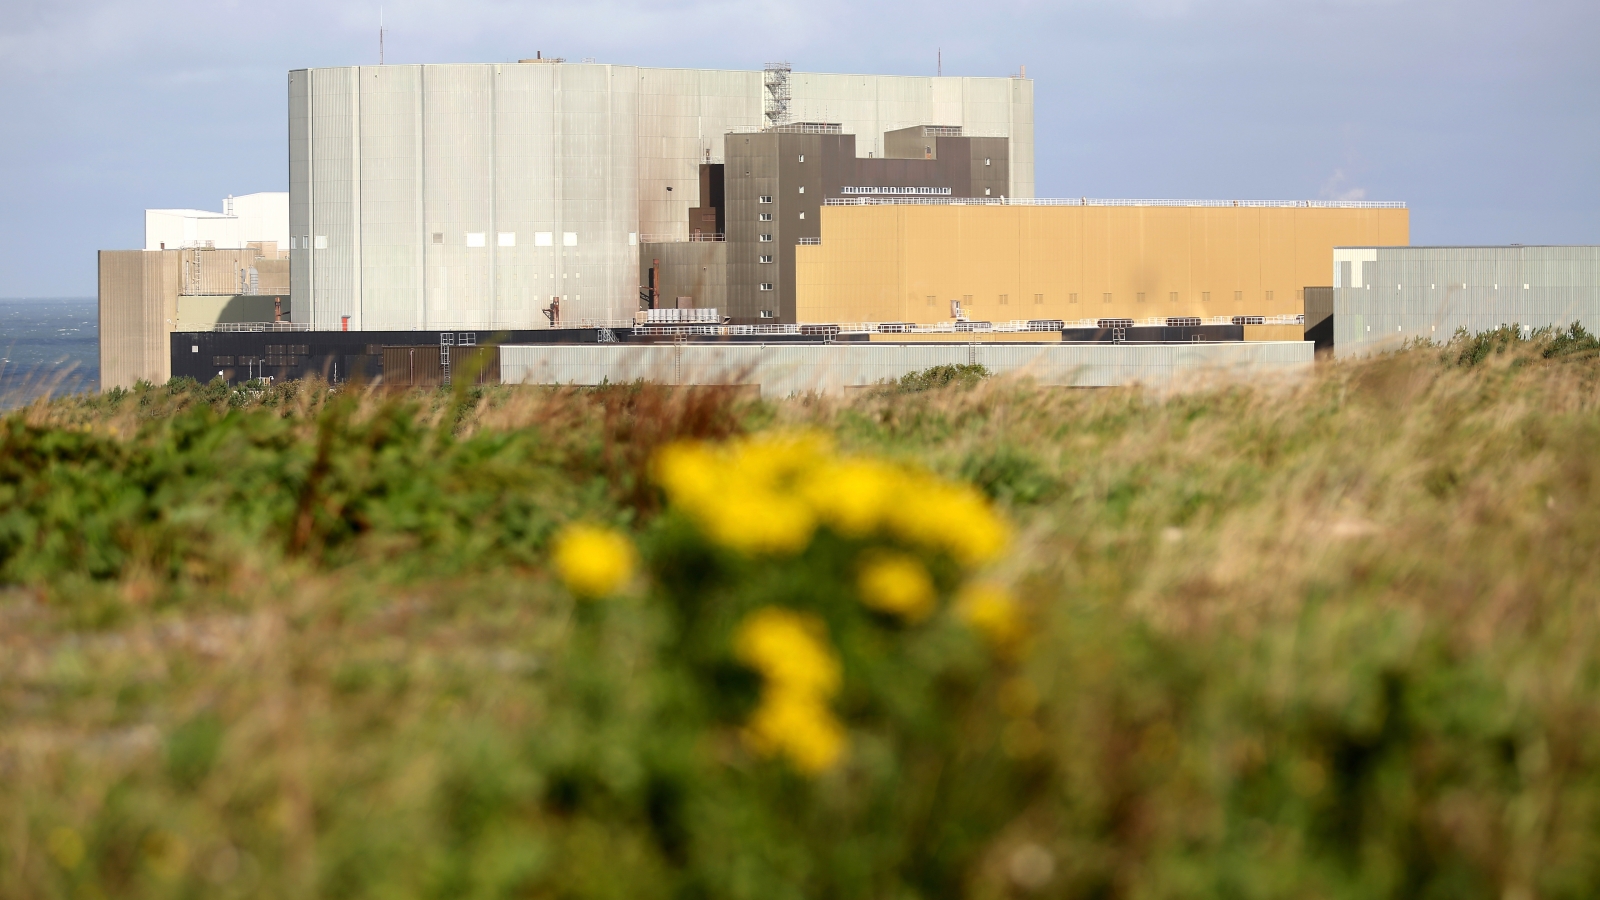 Hinkley Point C nuclear power station